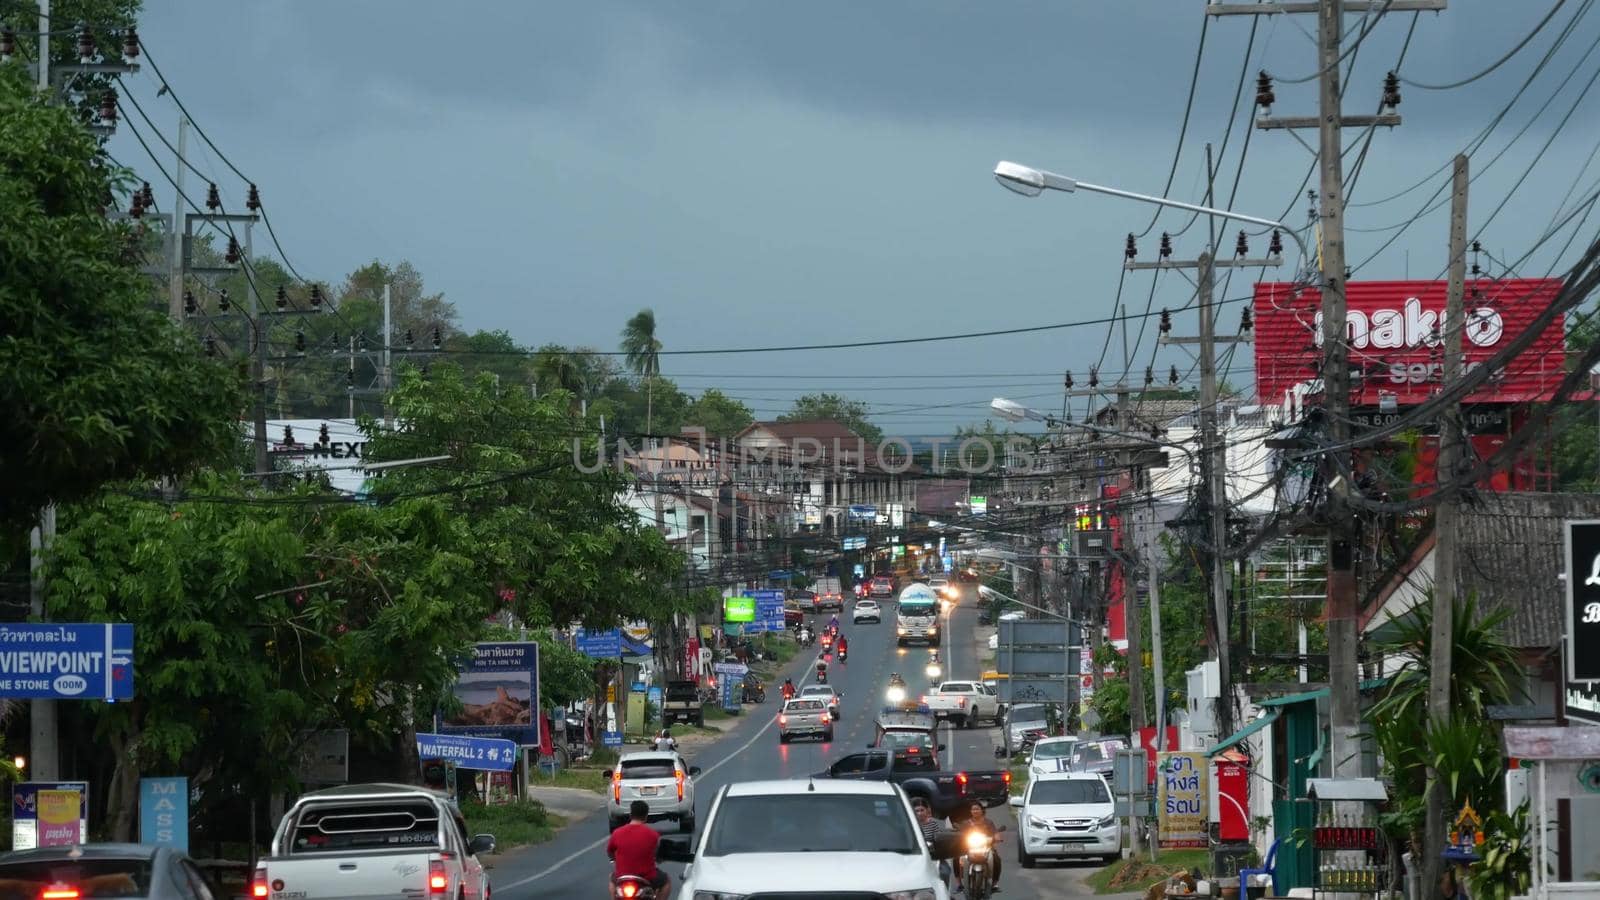 KOH SAMUI ISLAND, THAILAND - 11 JULY 2019 Busy transport populated city street in cloudy day. Typical street full of motorcycles and cars. Thick blue clouds before storm during wet season. by DogoraSun